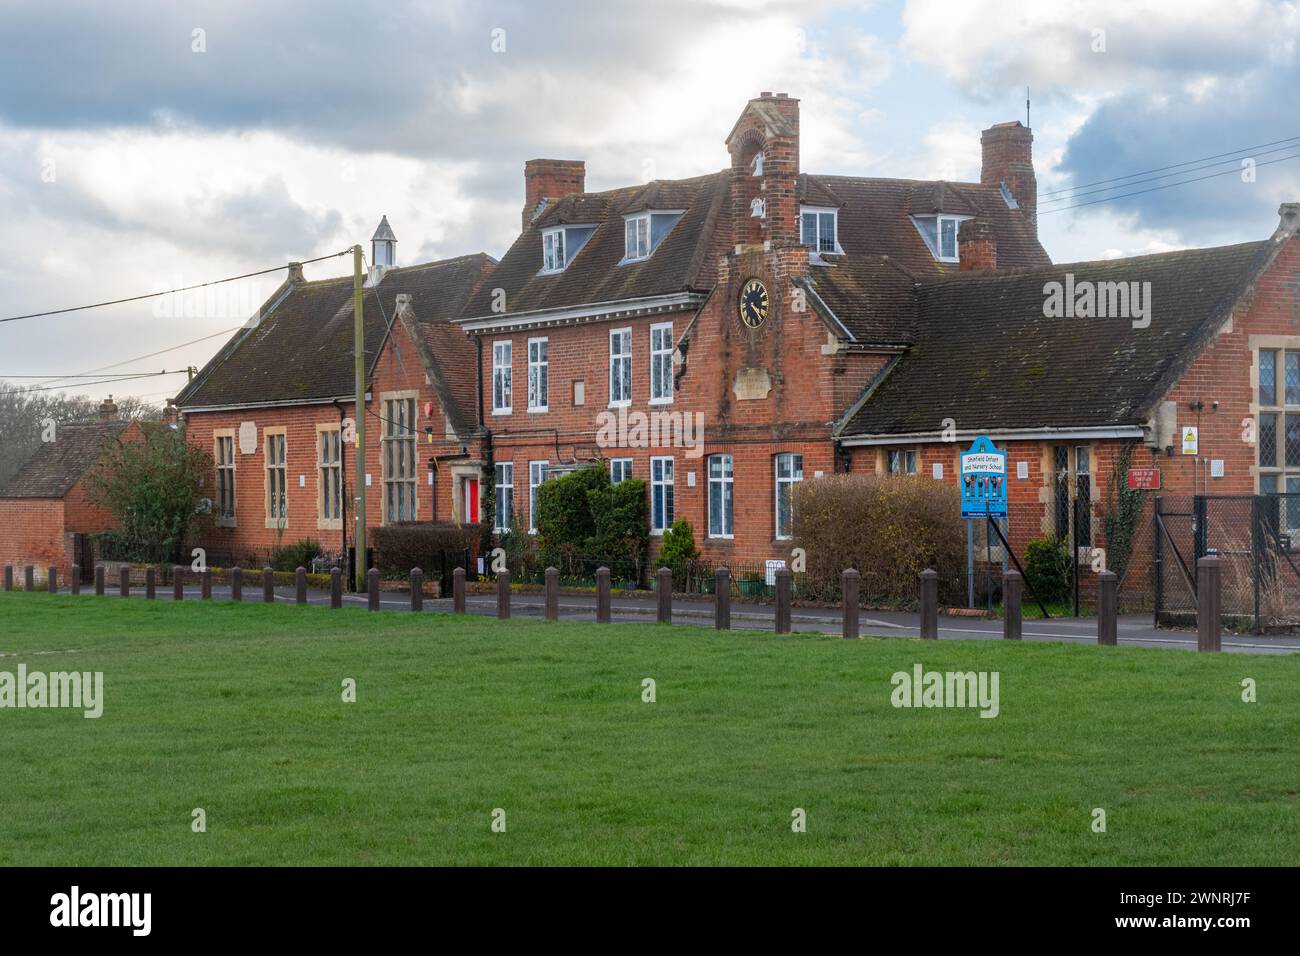 Shinfield Infant and Nursery School on School Green, village de Shinfield, Berkshire, Angleterre, Royaume-Uni Banque D'Images